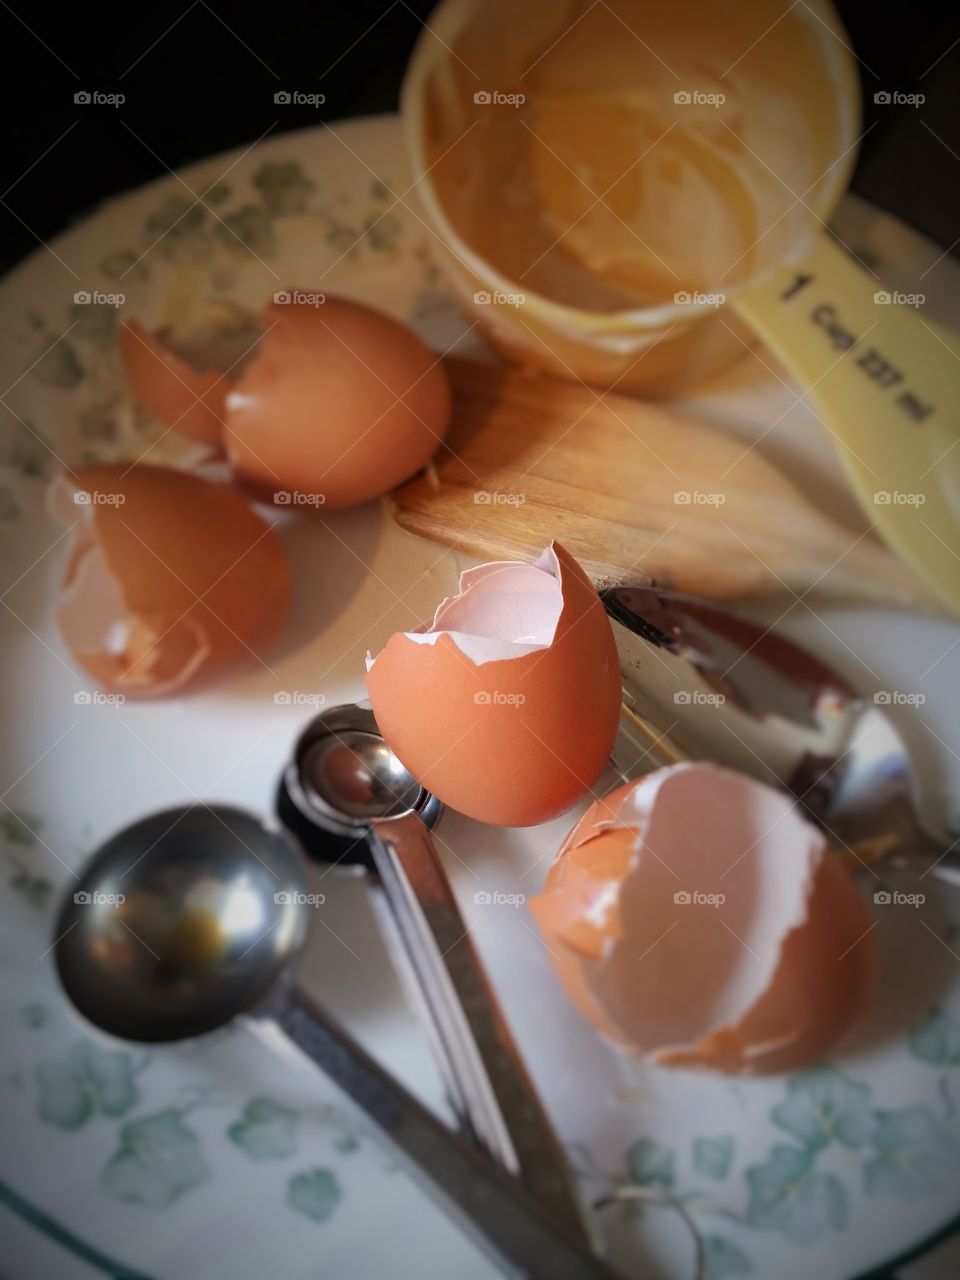 Cracked brown egg shells on a plate with measuring cup and spoons making a cake messy